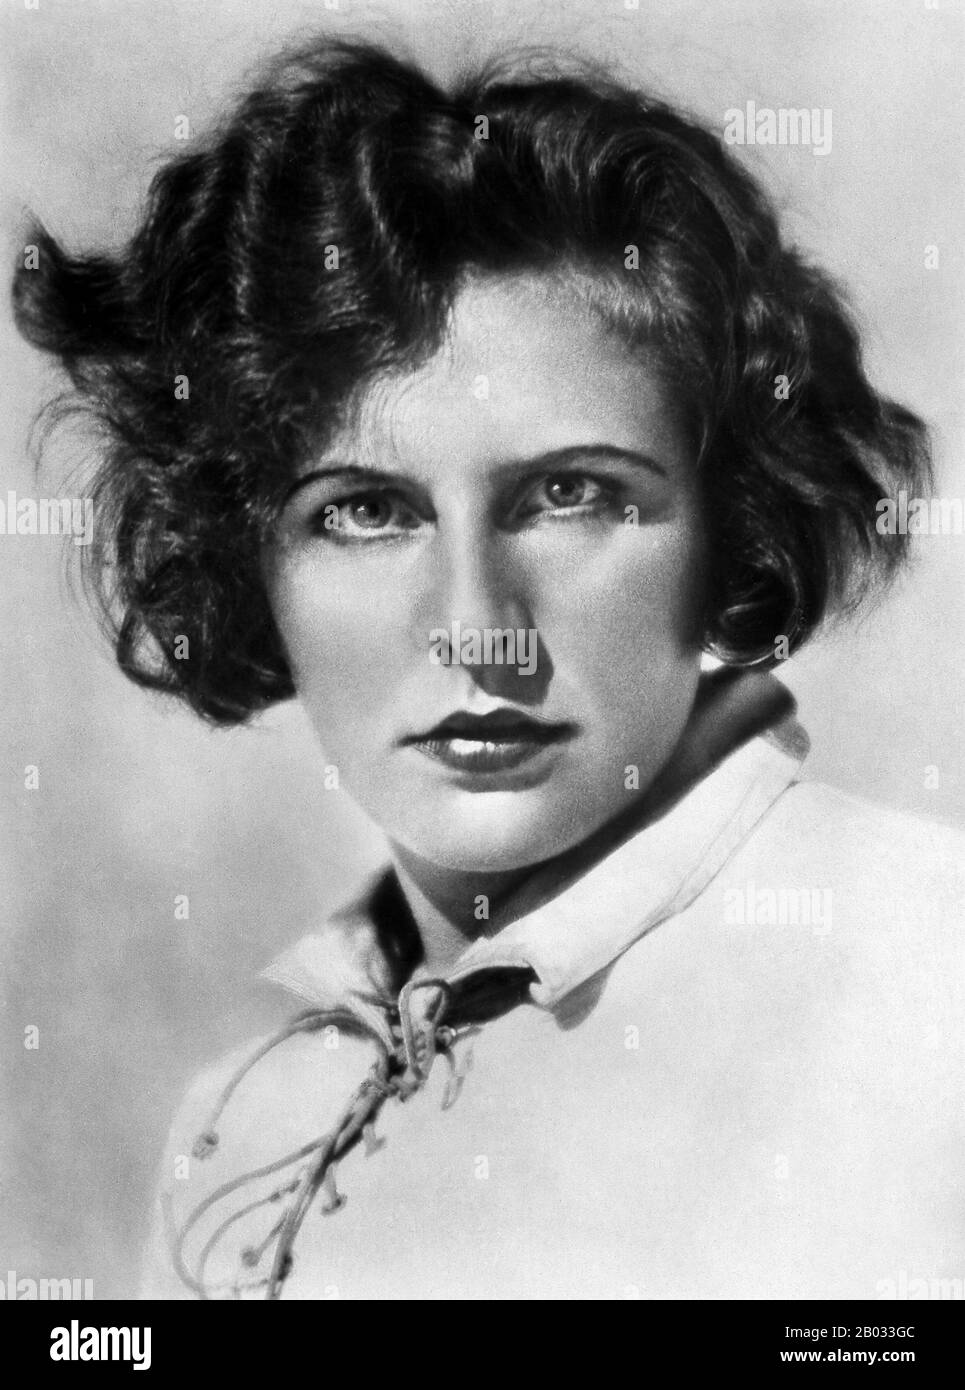 Helene Bertha Amalie 'Leni' Riefenstahl (22 August 1902 – 8 September 2003)  was a German film director, producer, screenwriter, editor, photographer,  actress, dancer, and propagandist for the Nazis Stock Photo - Alamy